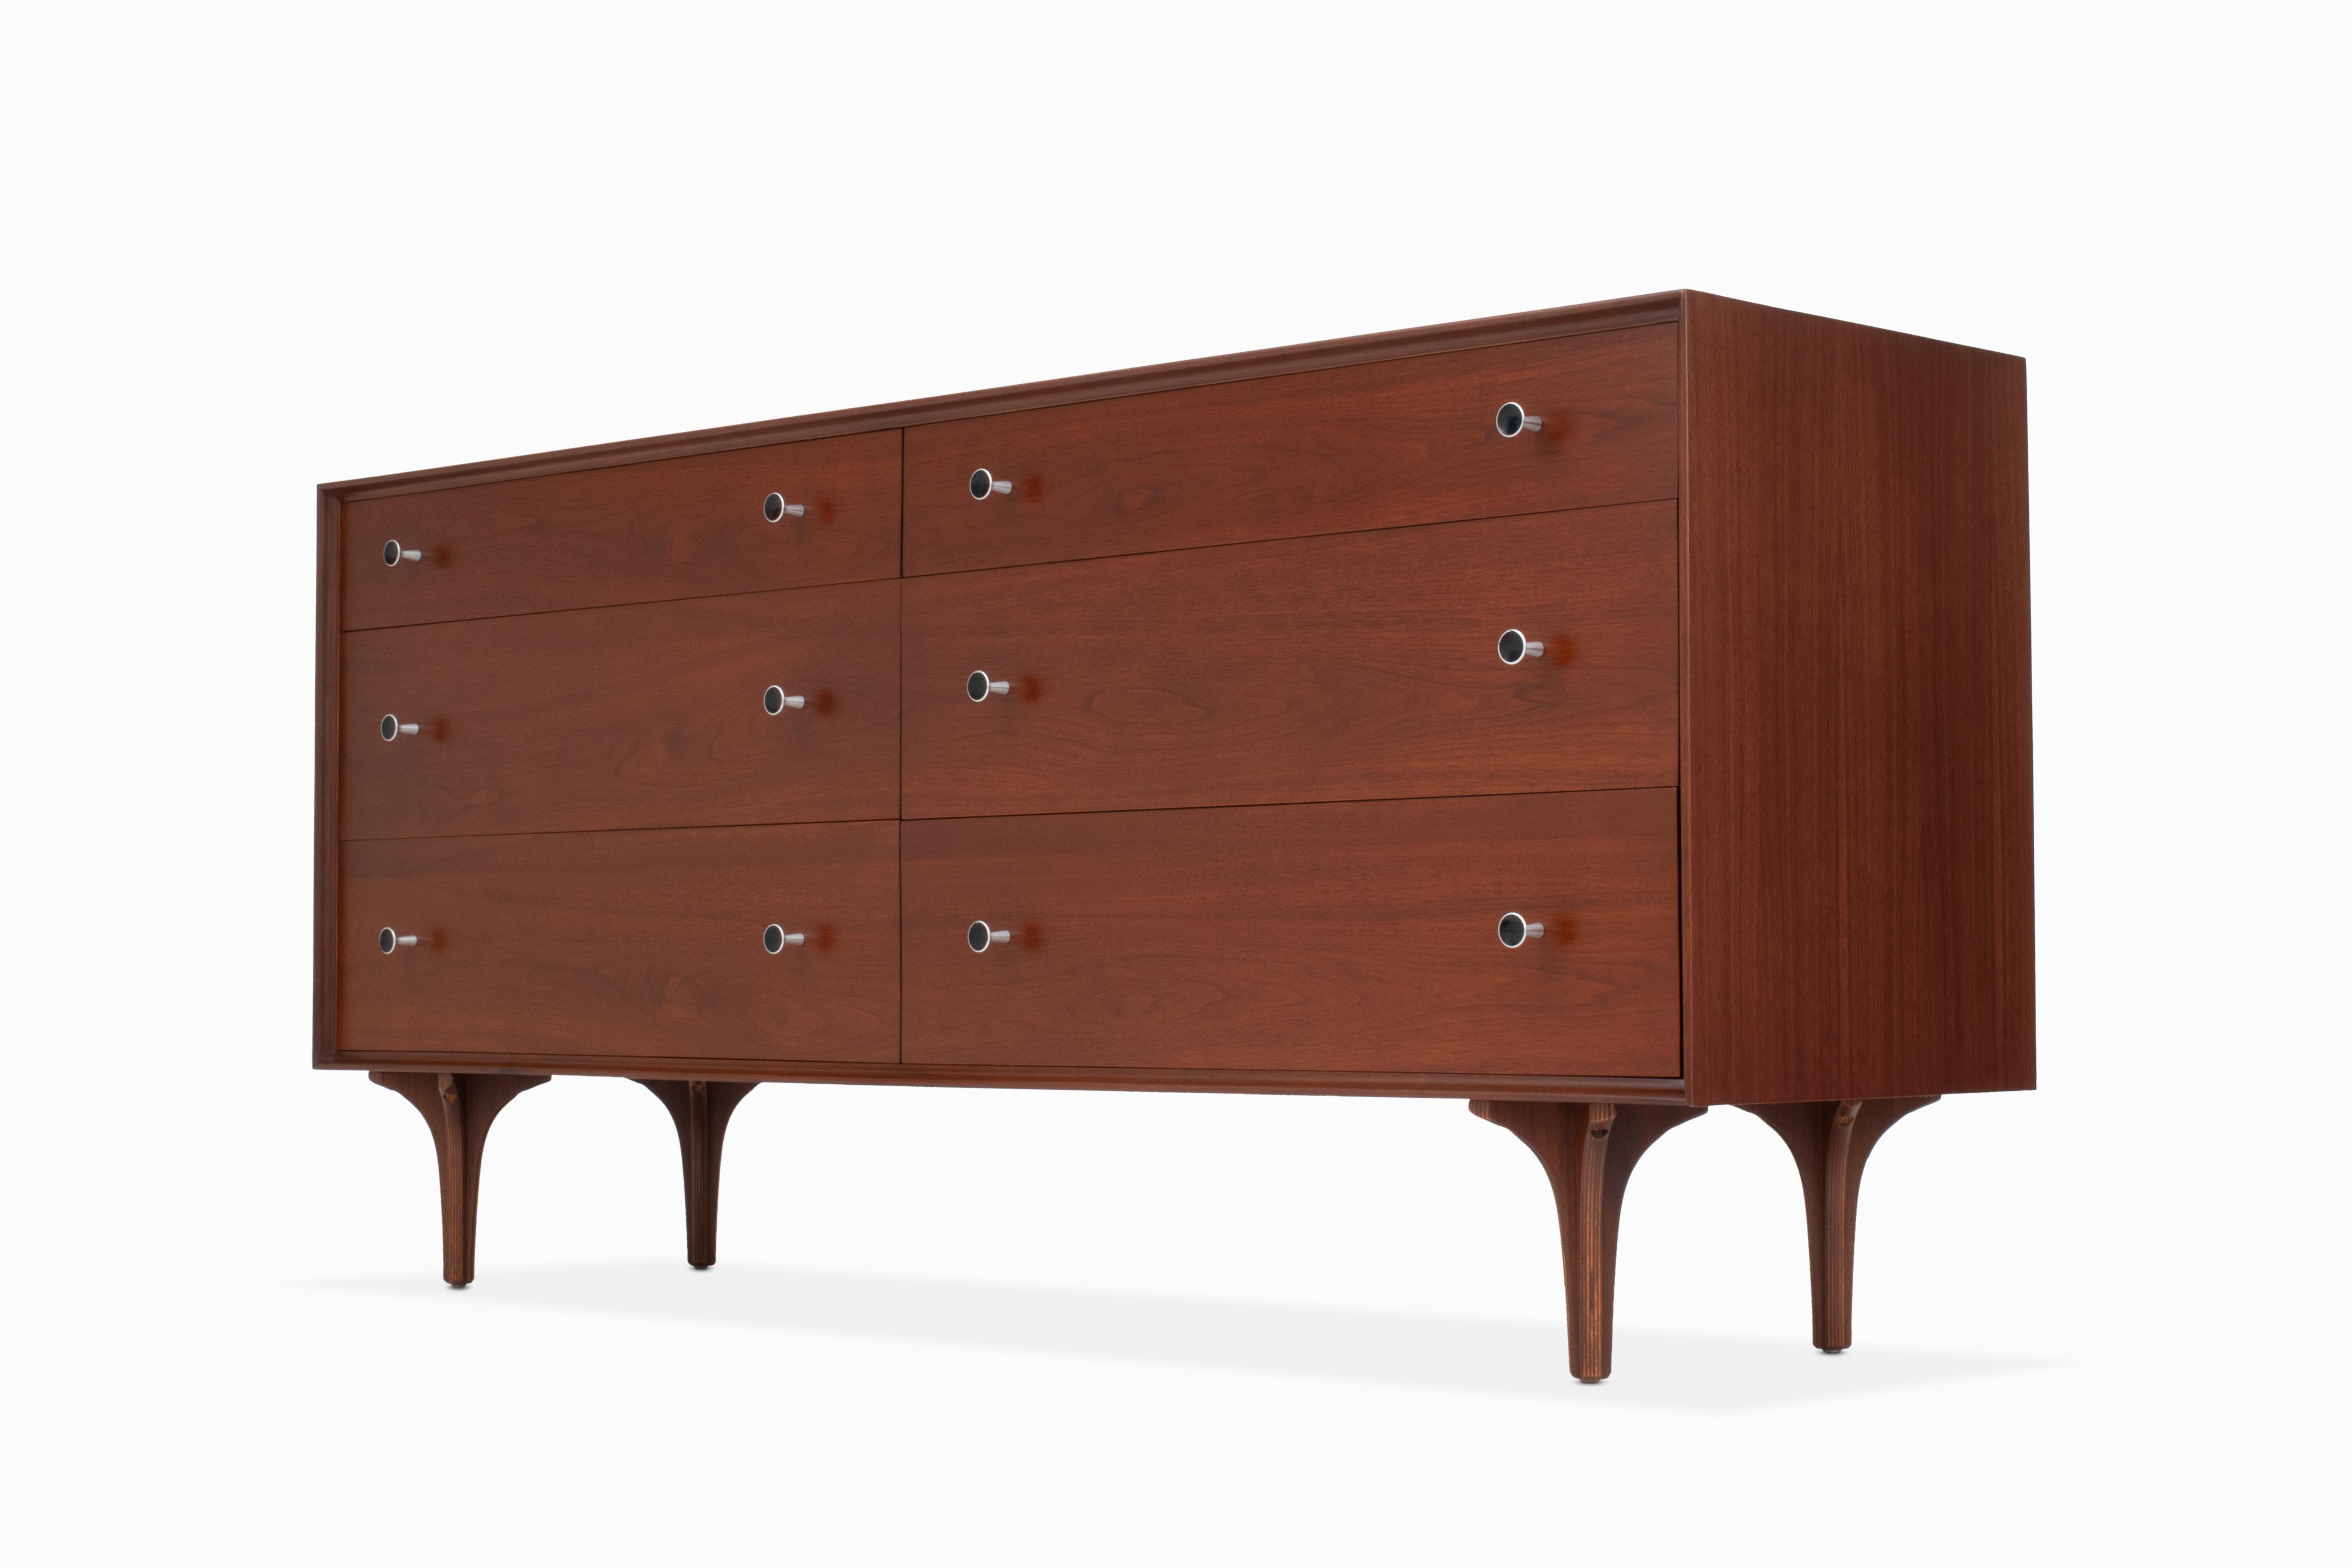 Here is a lovely and uncommon walnut dresser designed by Robert Baron for Glenn of California. It is in beautiful refinished condition, featuring 6 large drawers (2 with dividers), hourglass aluminum pulls with enamel detail and uniquely sculptural